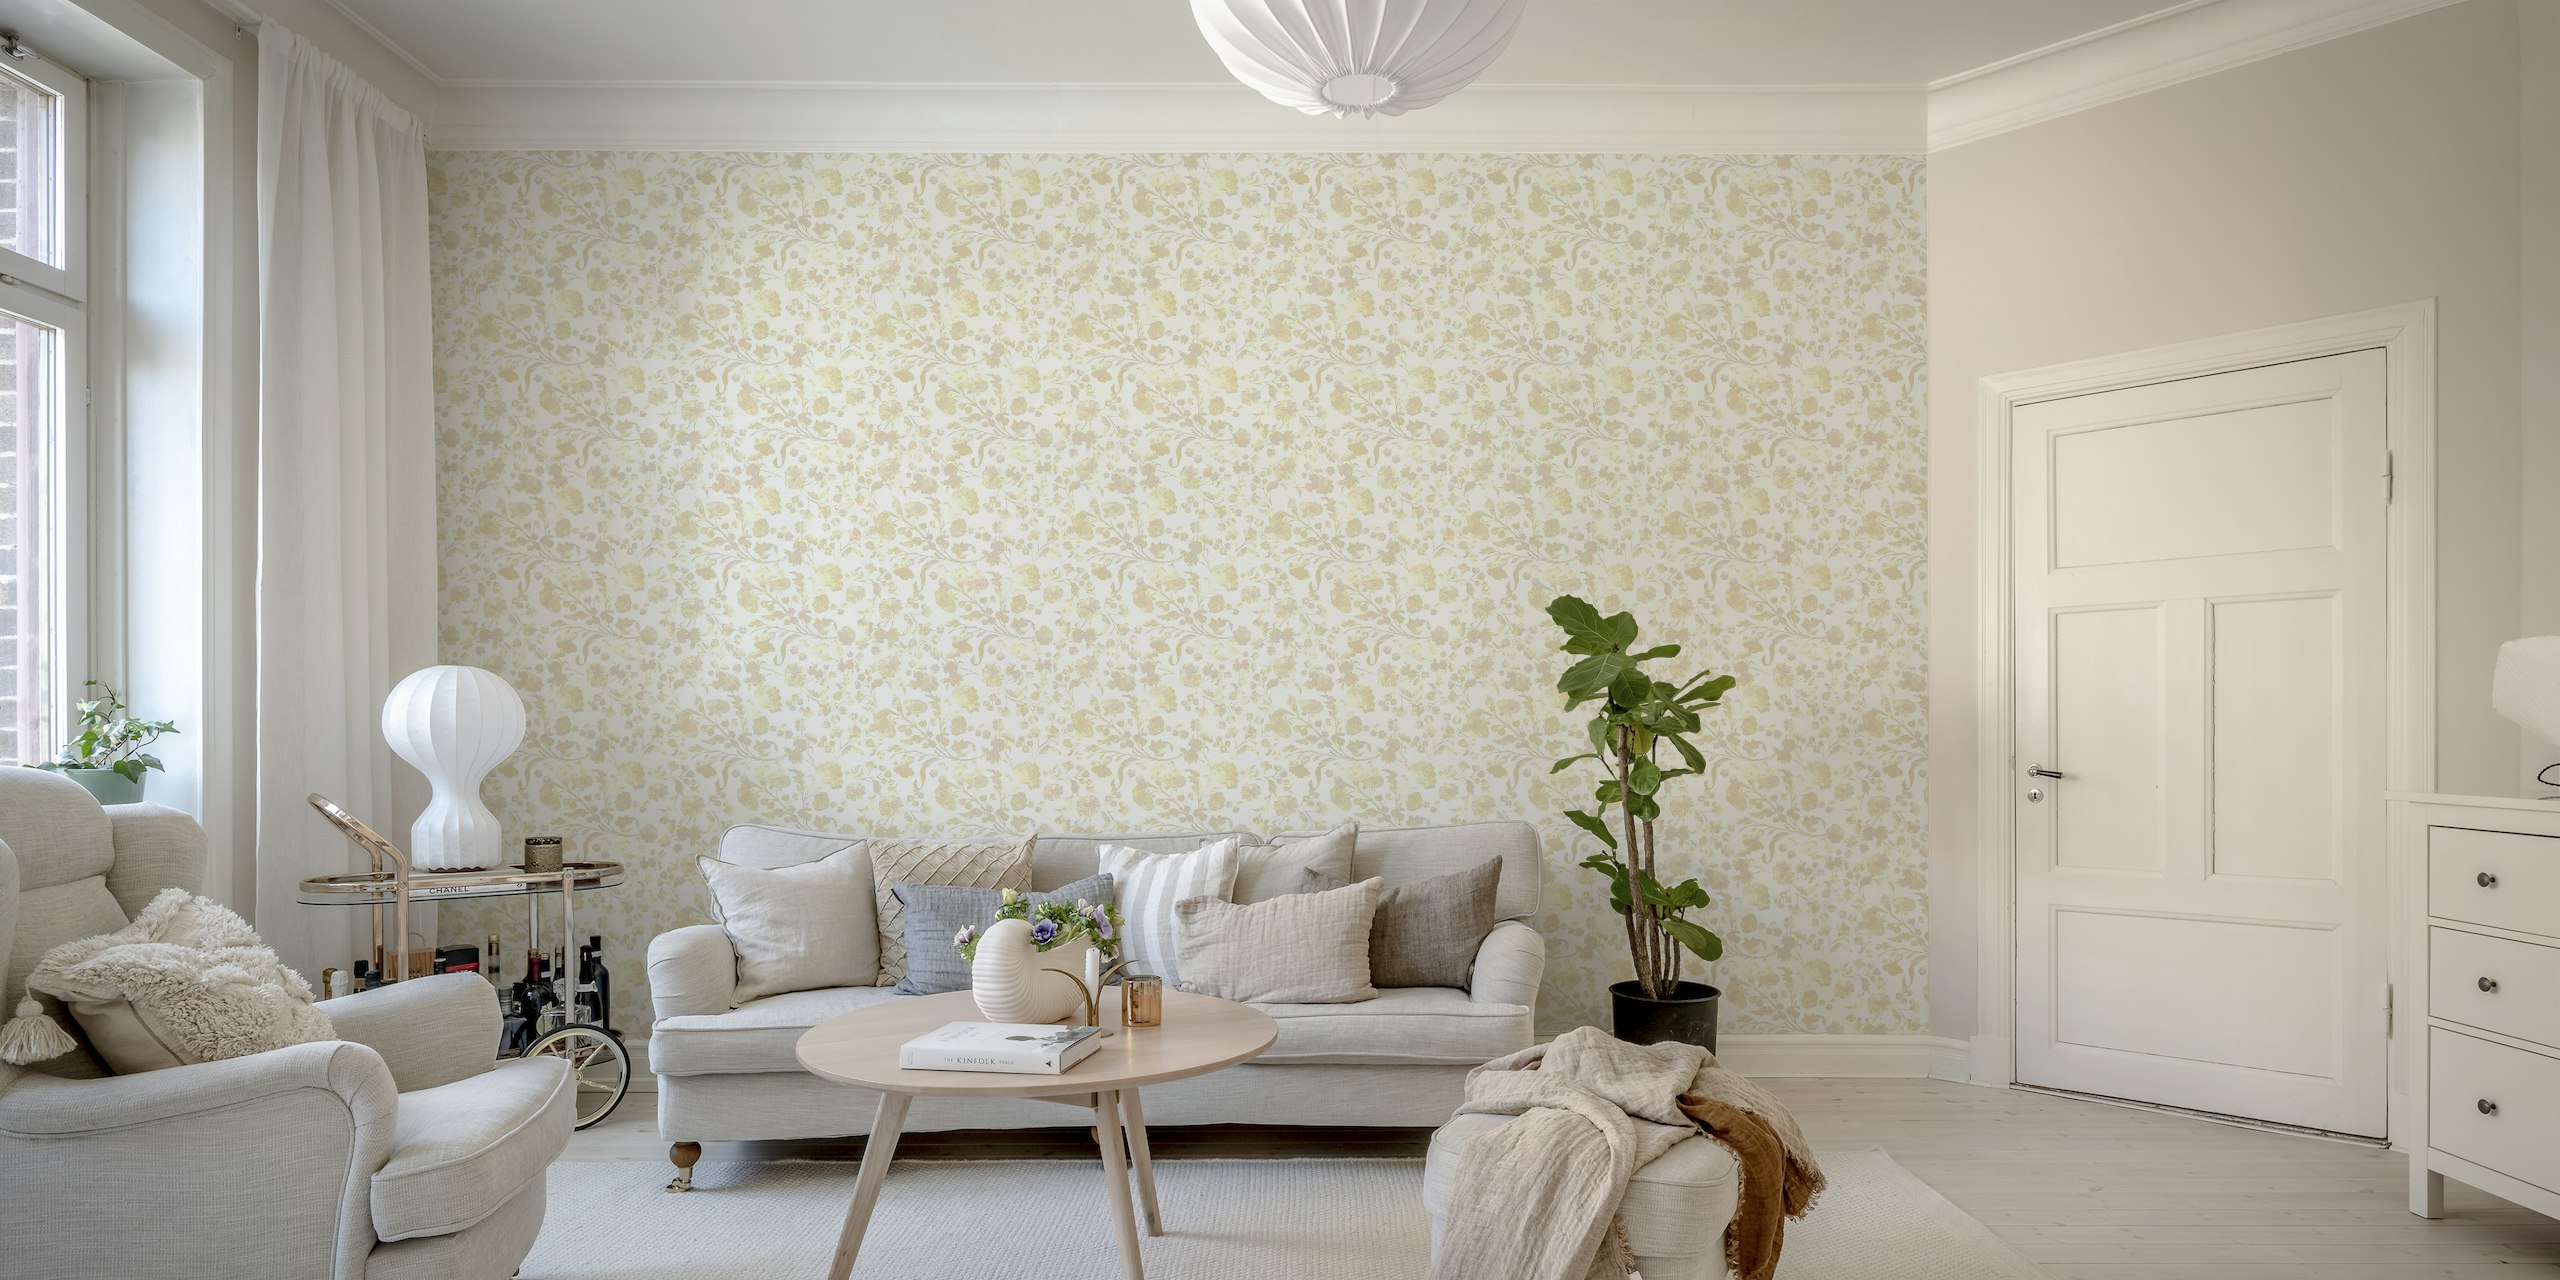 Textured sunny yellow floral behang